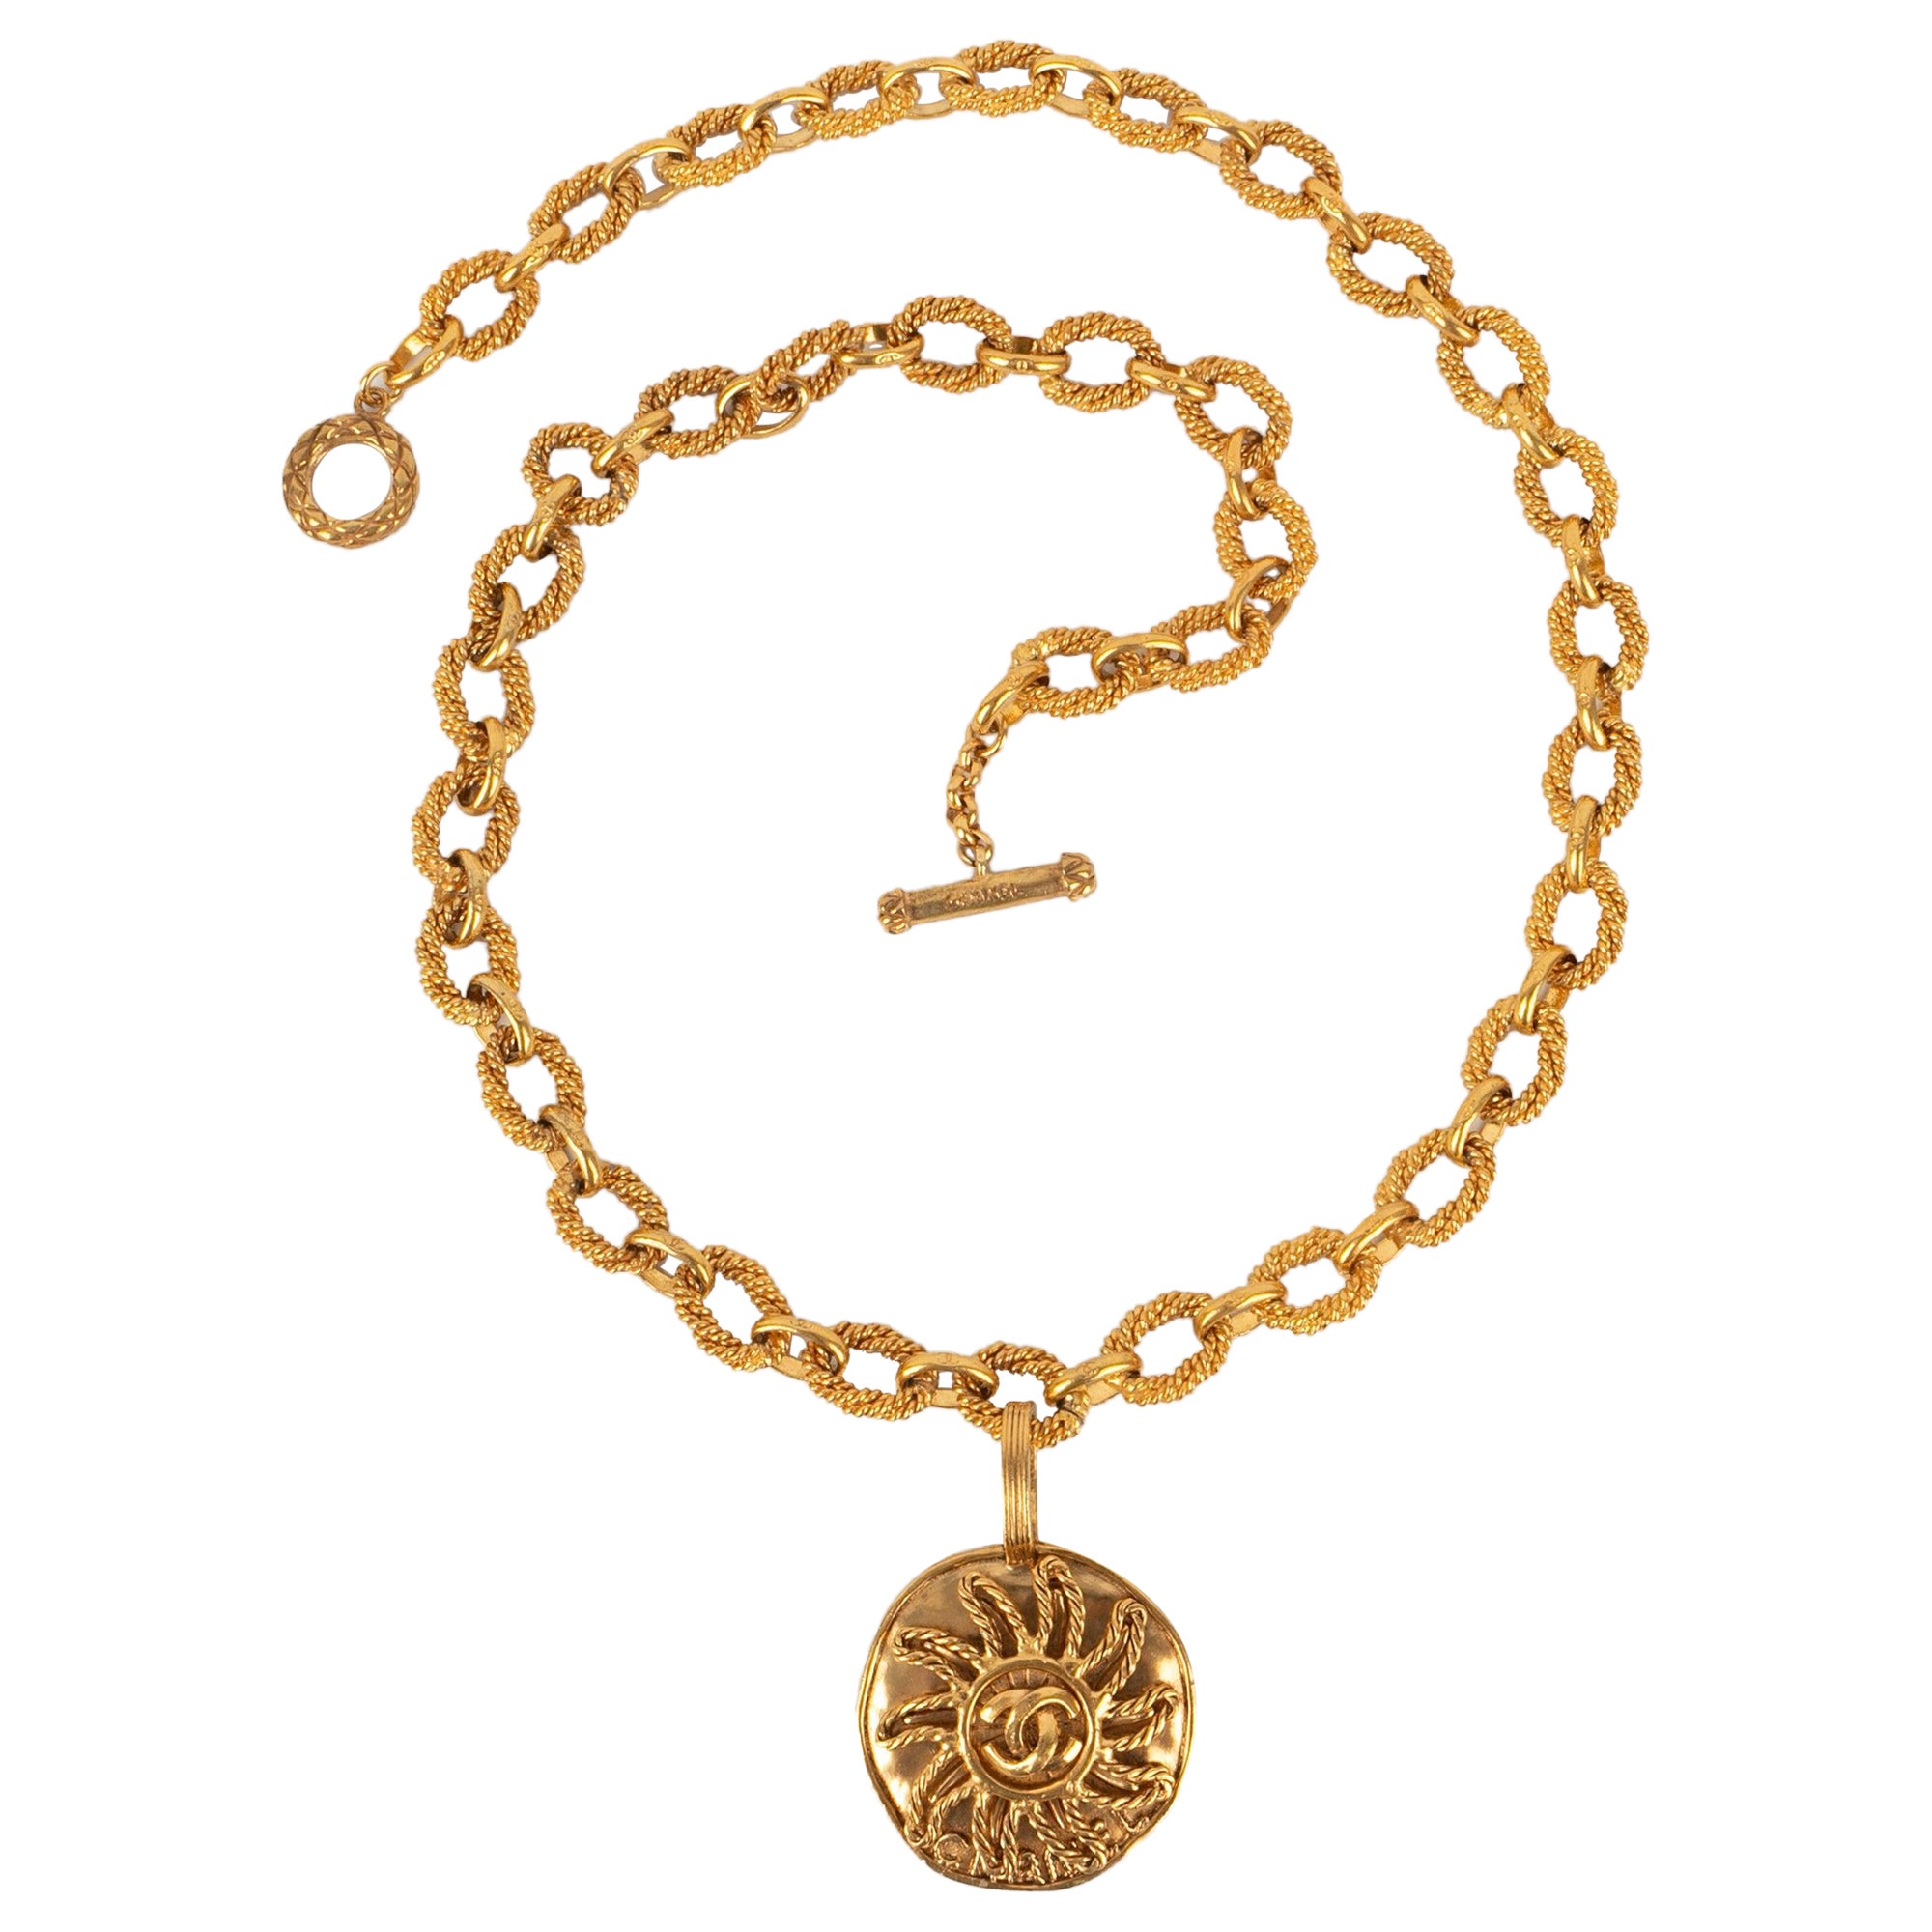 Chanel Golden Metal Necklace with a Sun Pendant, 1993 For Sale